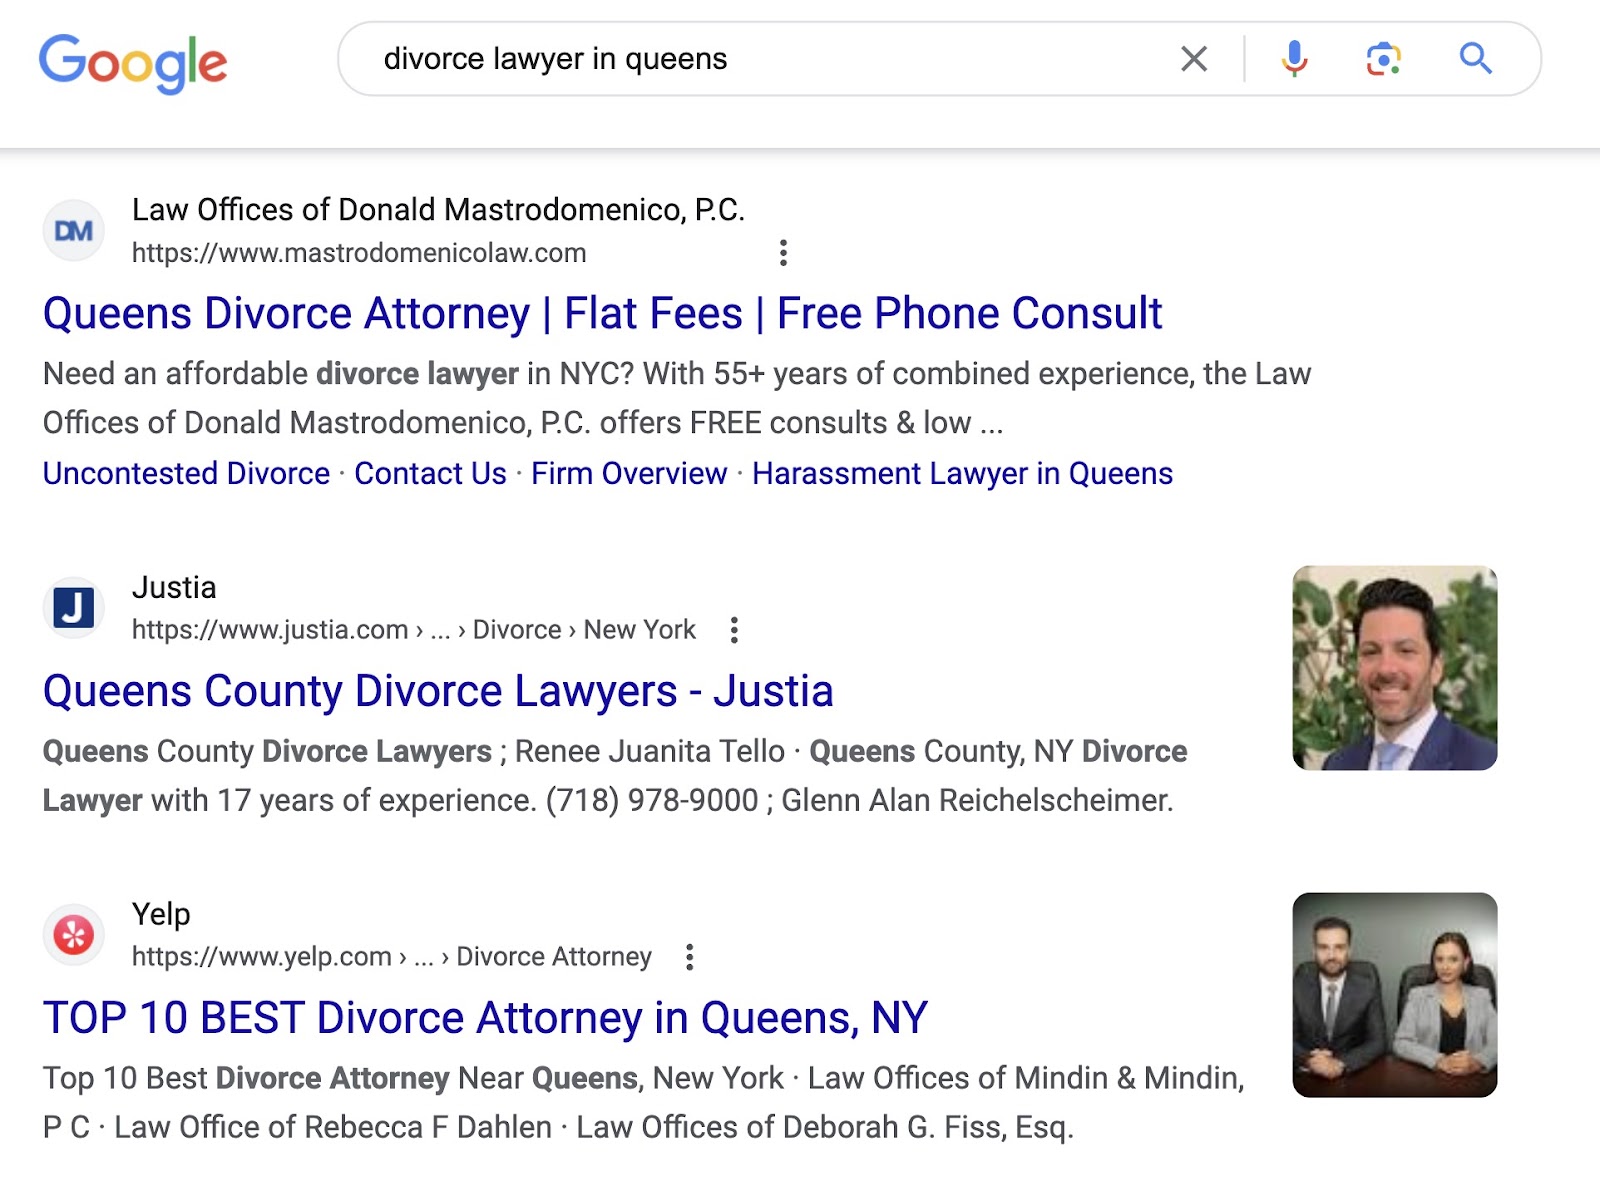 Google's SERP for “divorce lawyer   successful  queens” query